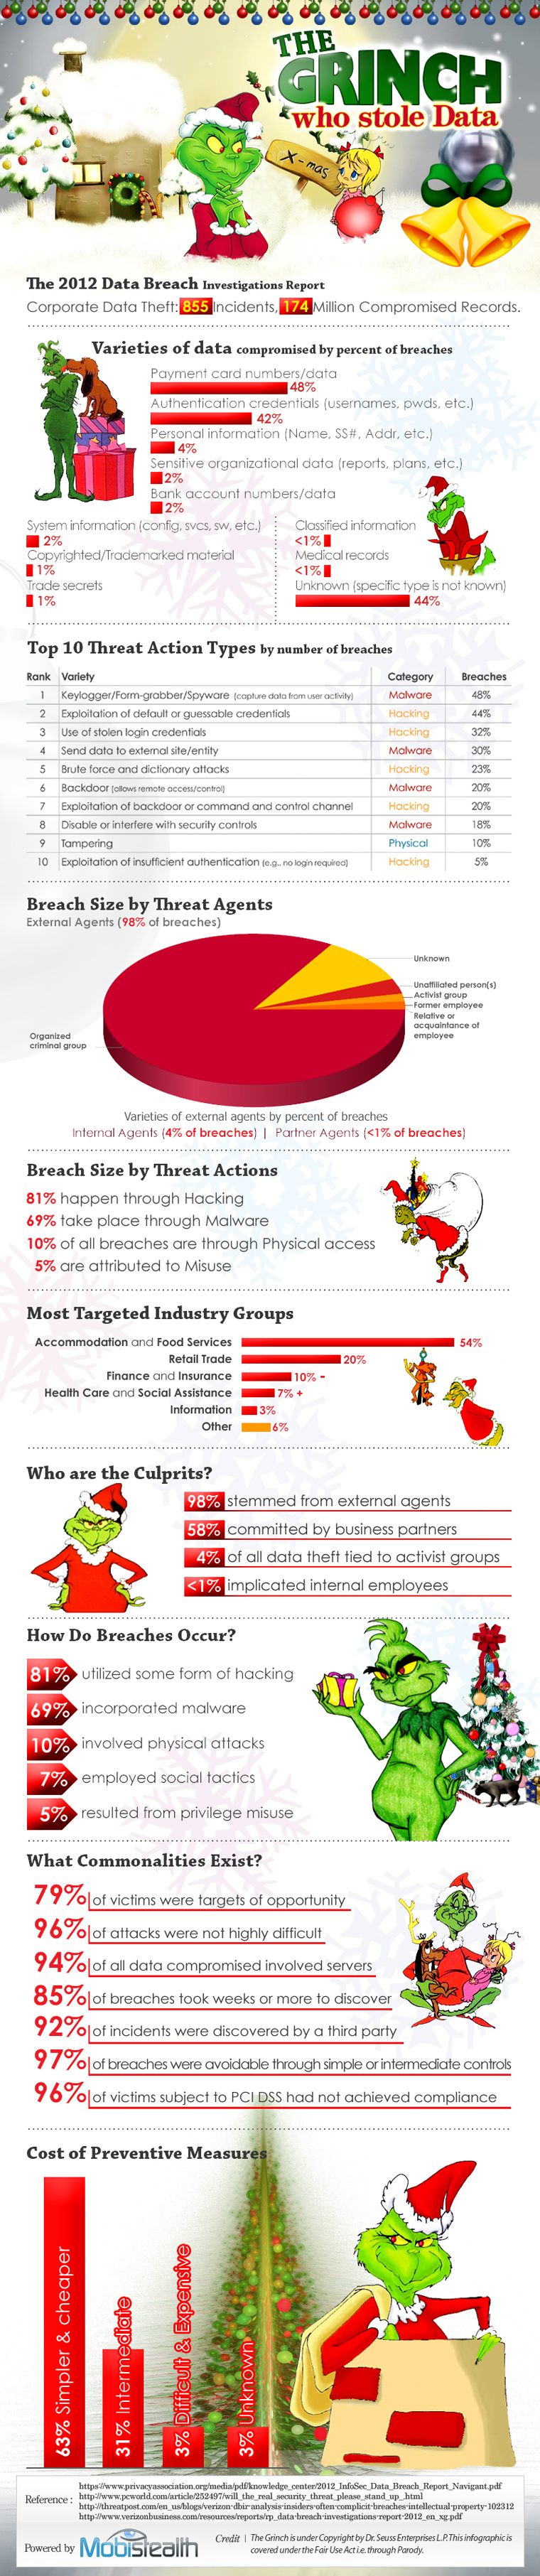 Grinch Who Stole Data infographic